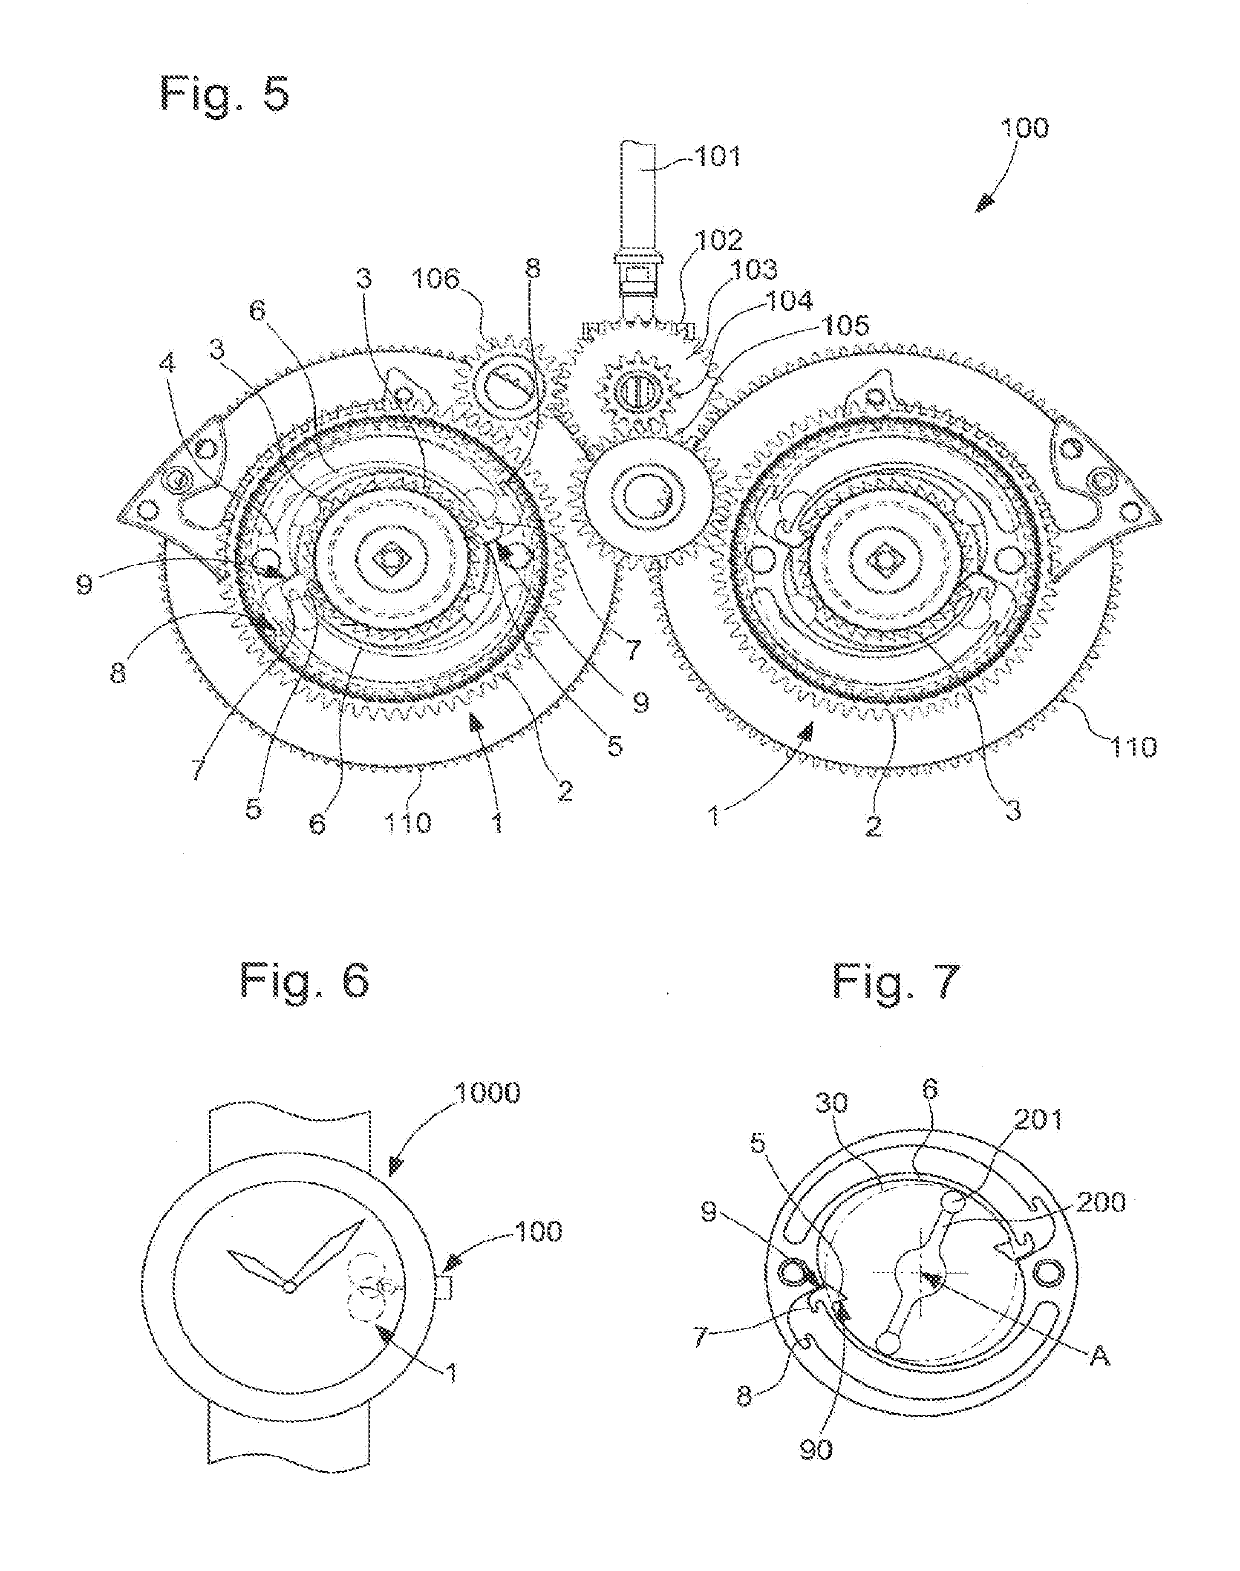 Timepiece wheel set with a unidirectional wheel